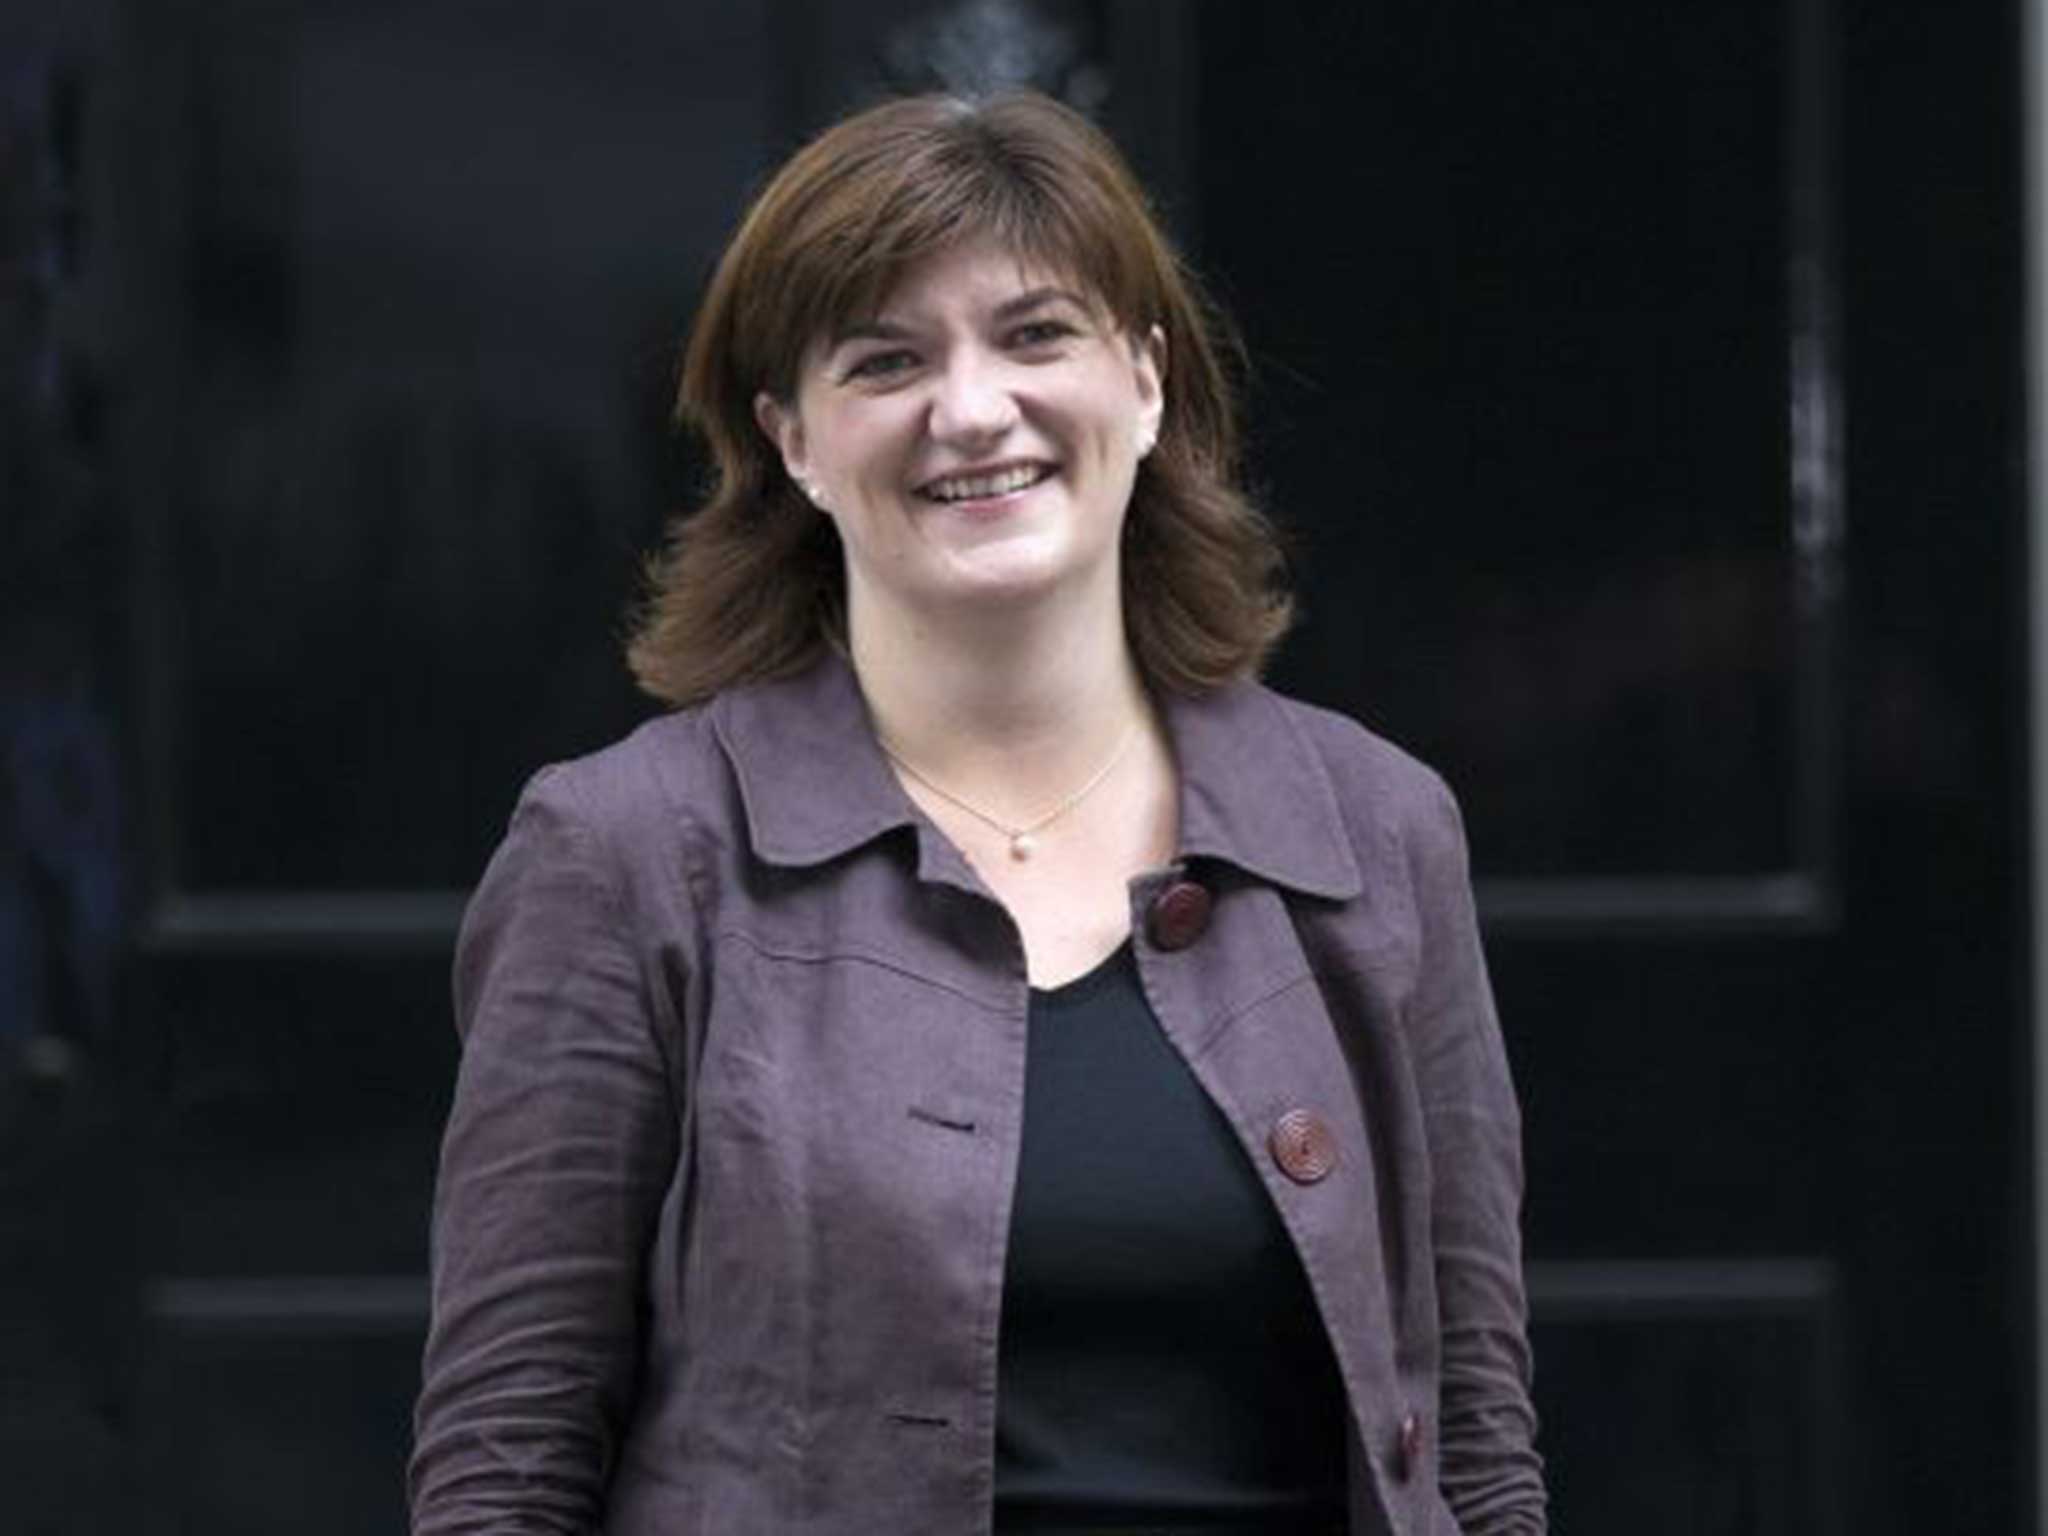 Education Secretary Nicky Morgan has said that teenagers should steer away from the arts and humanities and opt for science or maths subjects if they want to access the widest range of jobs